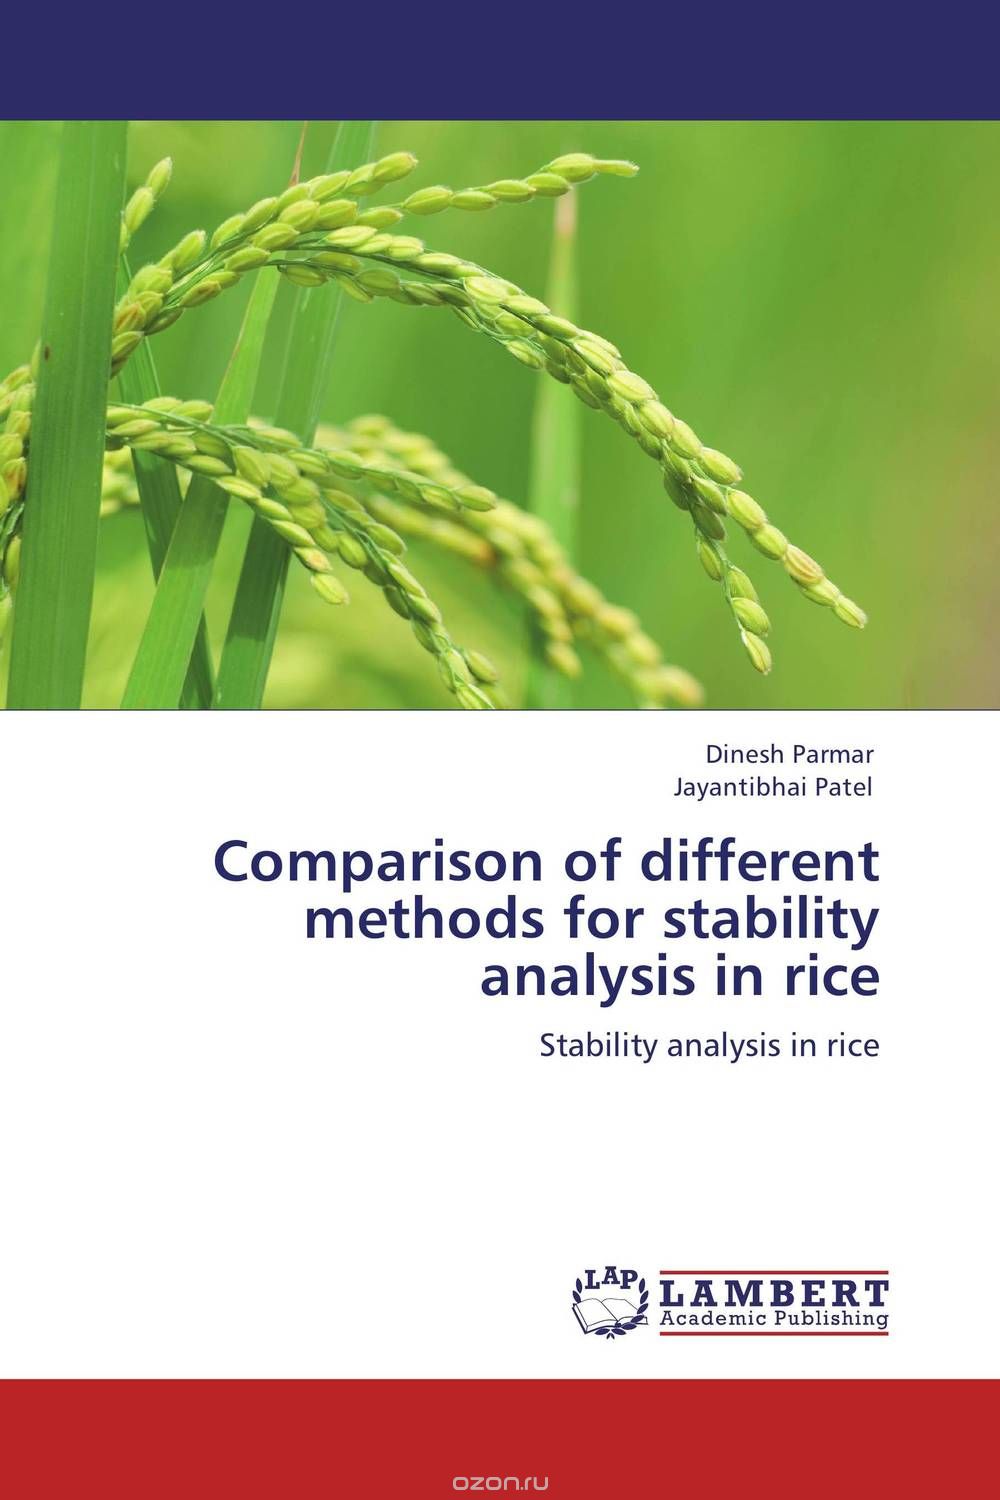 Comparison of different methods for stability analysis in rice